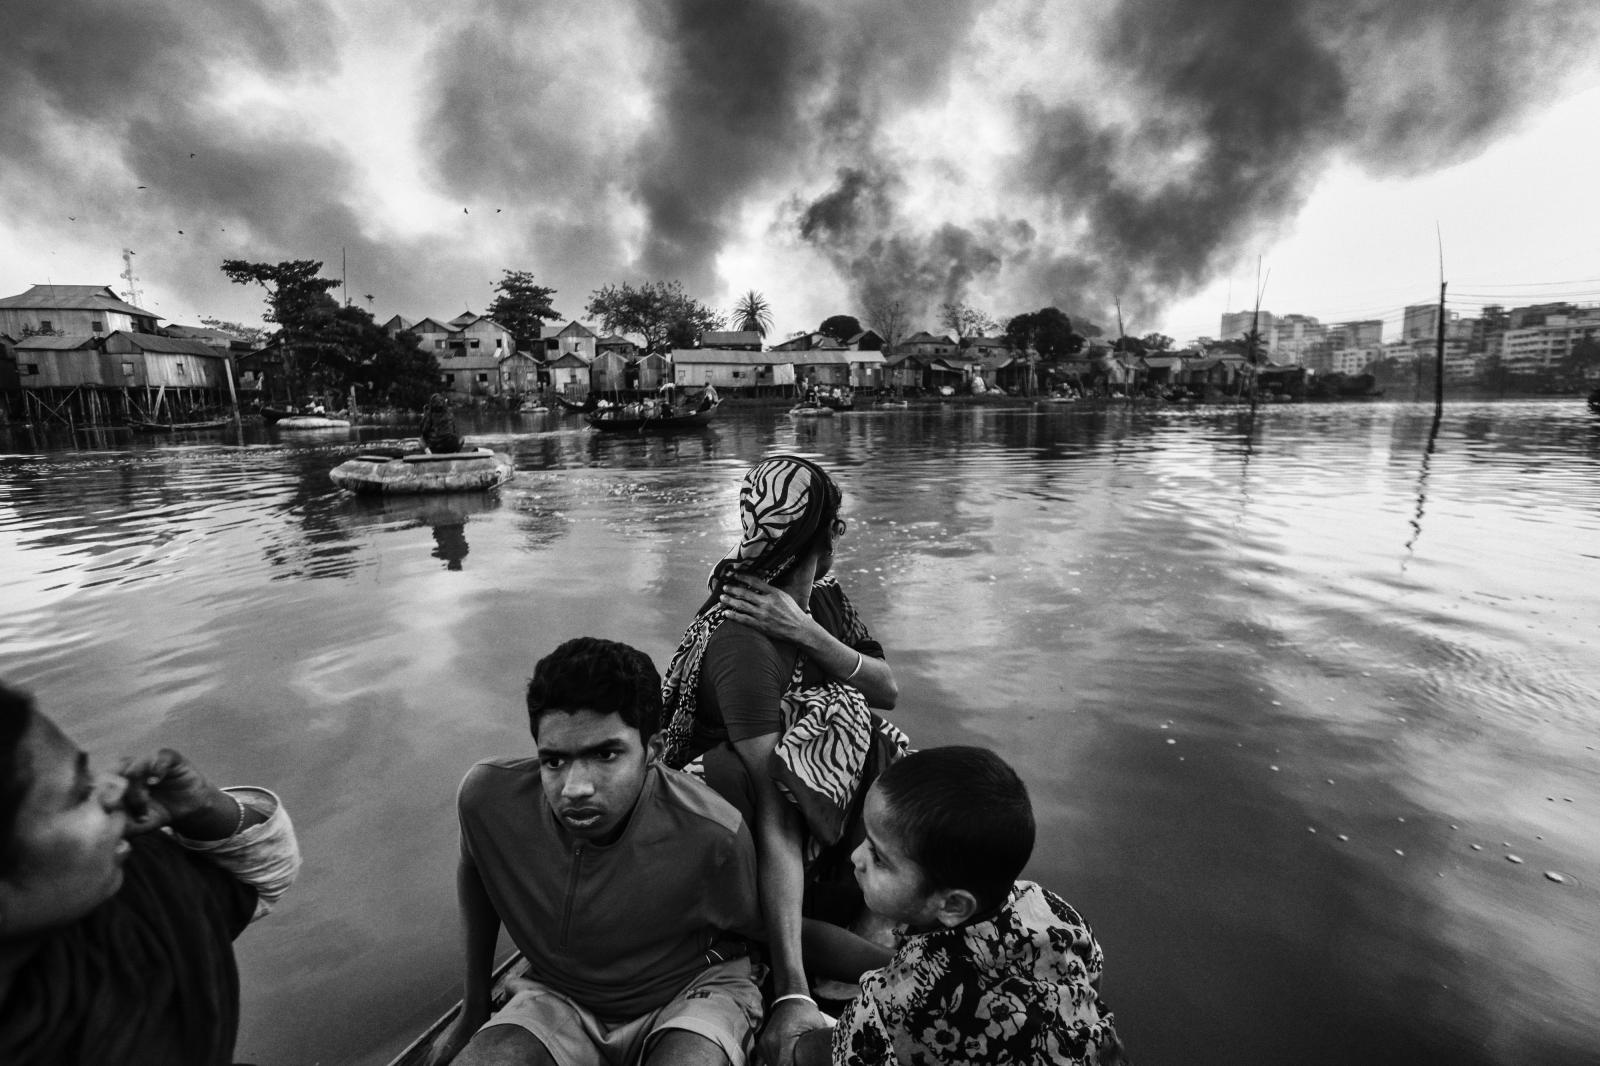 Slum dwellers crossing a lake b...ve hours to put out the flames.